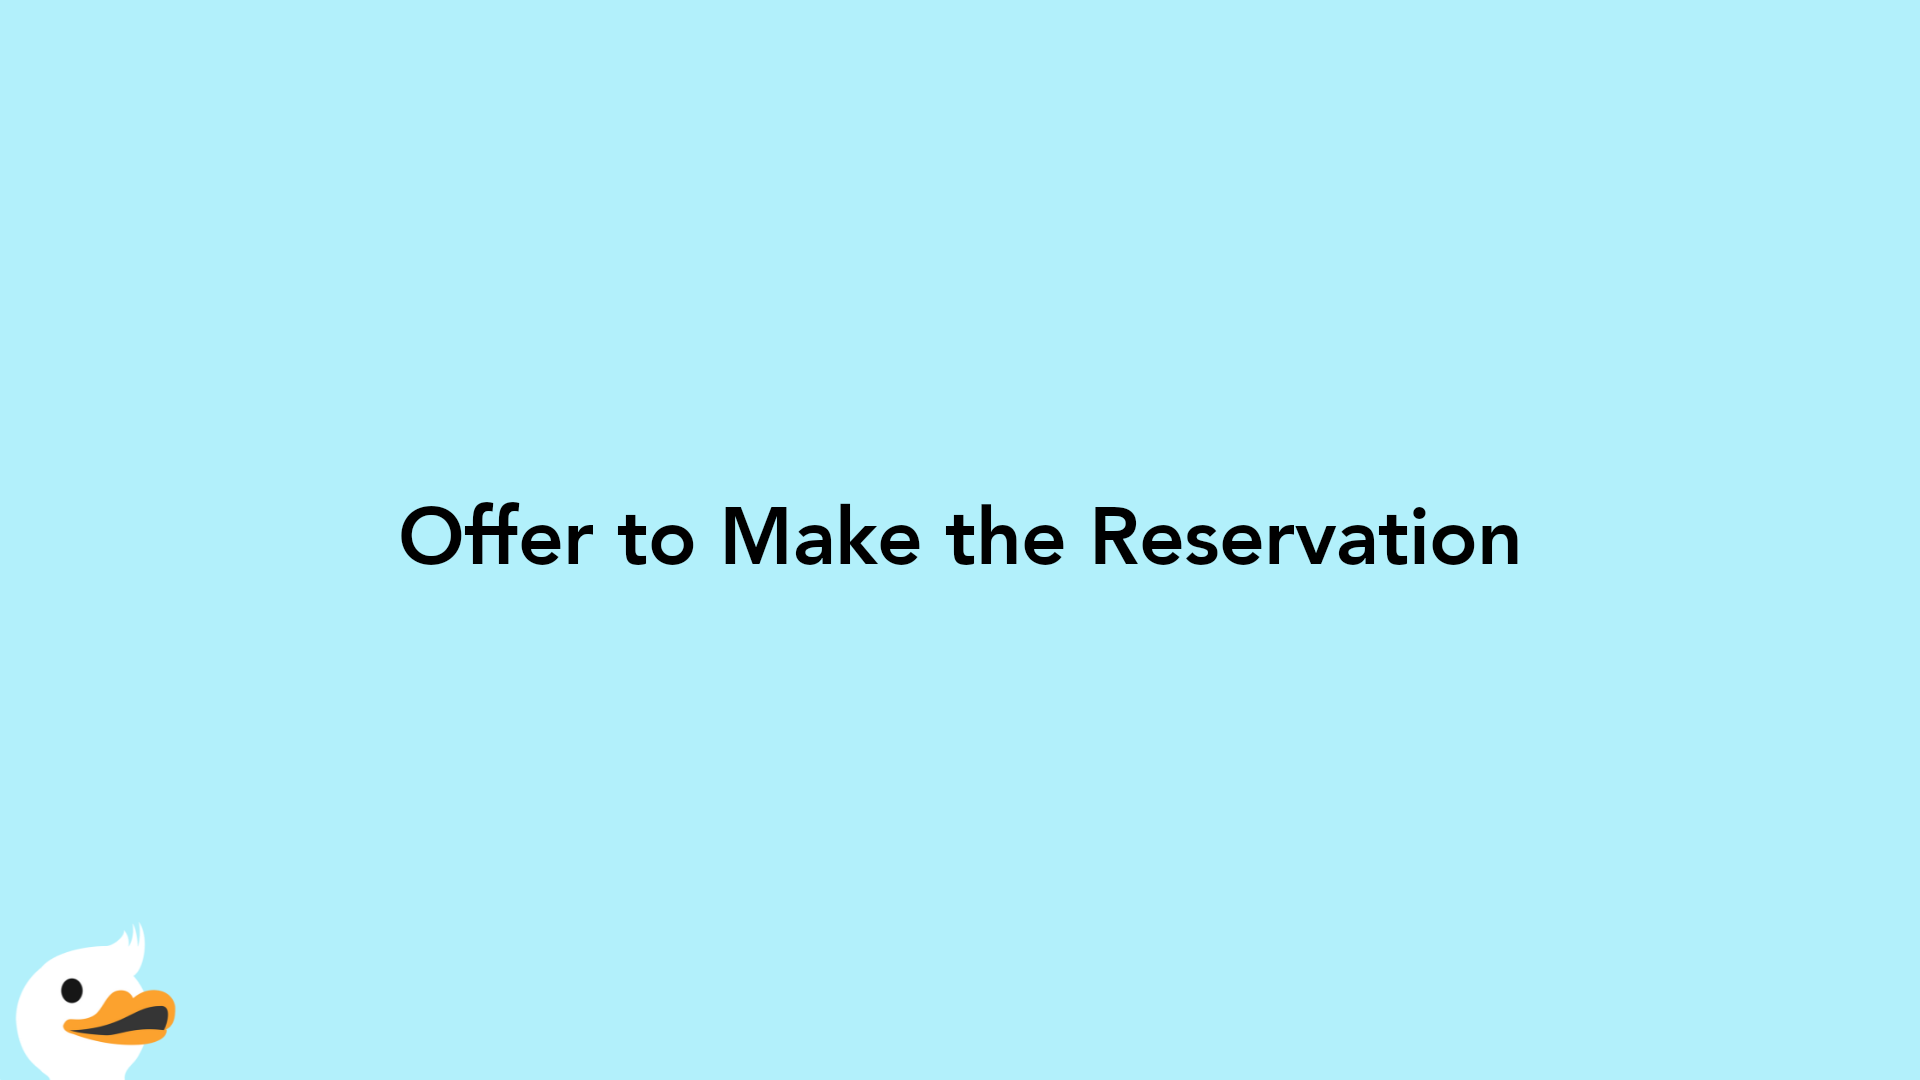 Offer to Make the Reservation